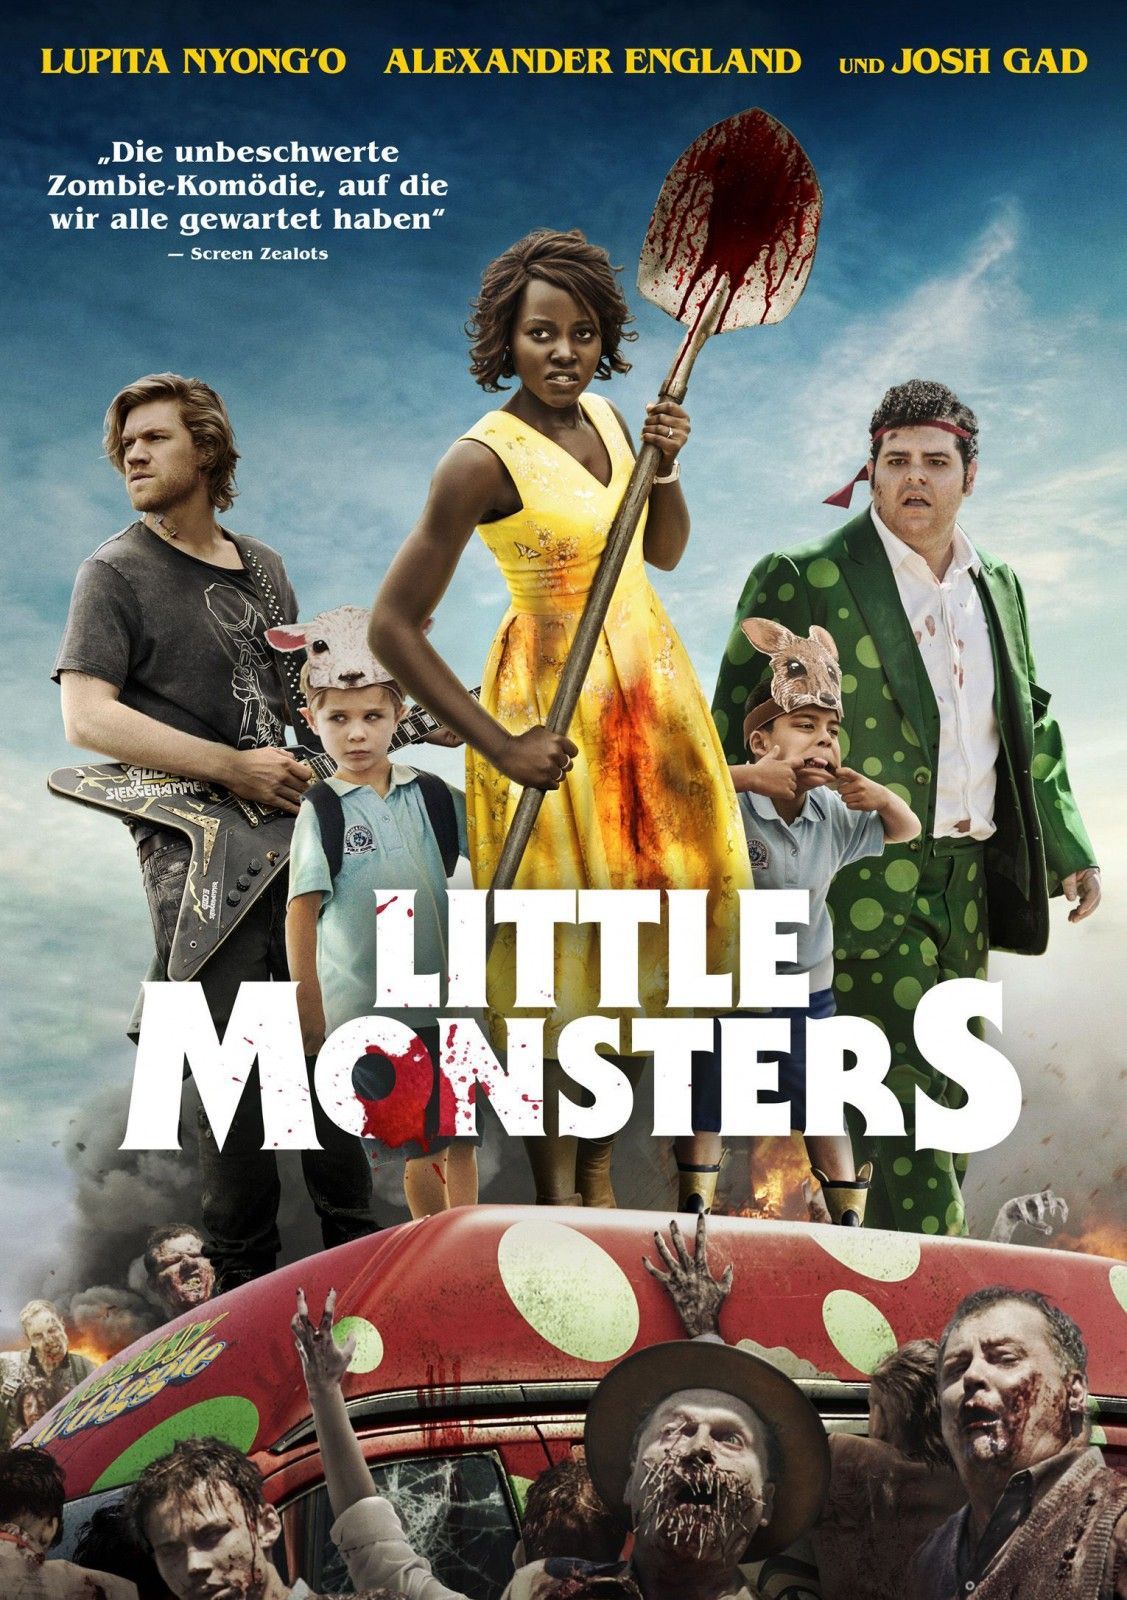 Little Monsters 2019 Dual Audio Hindi Dubbed. Little